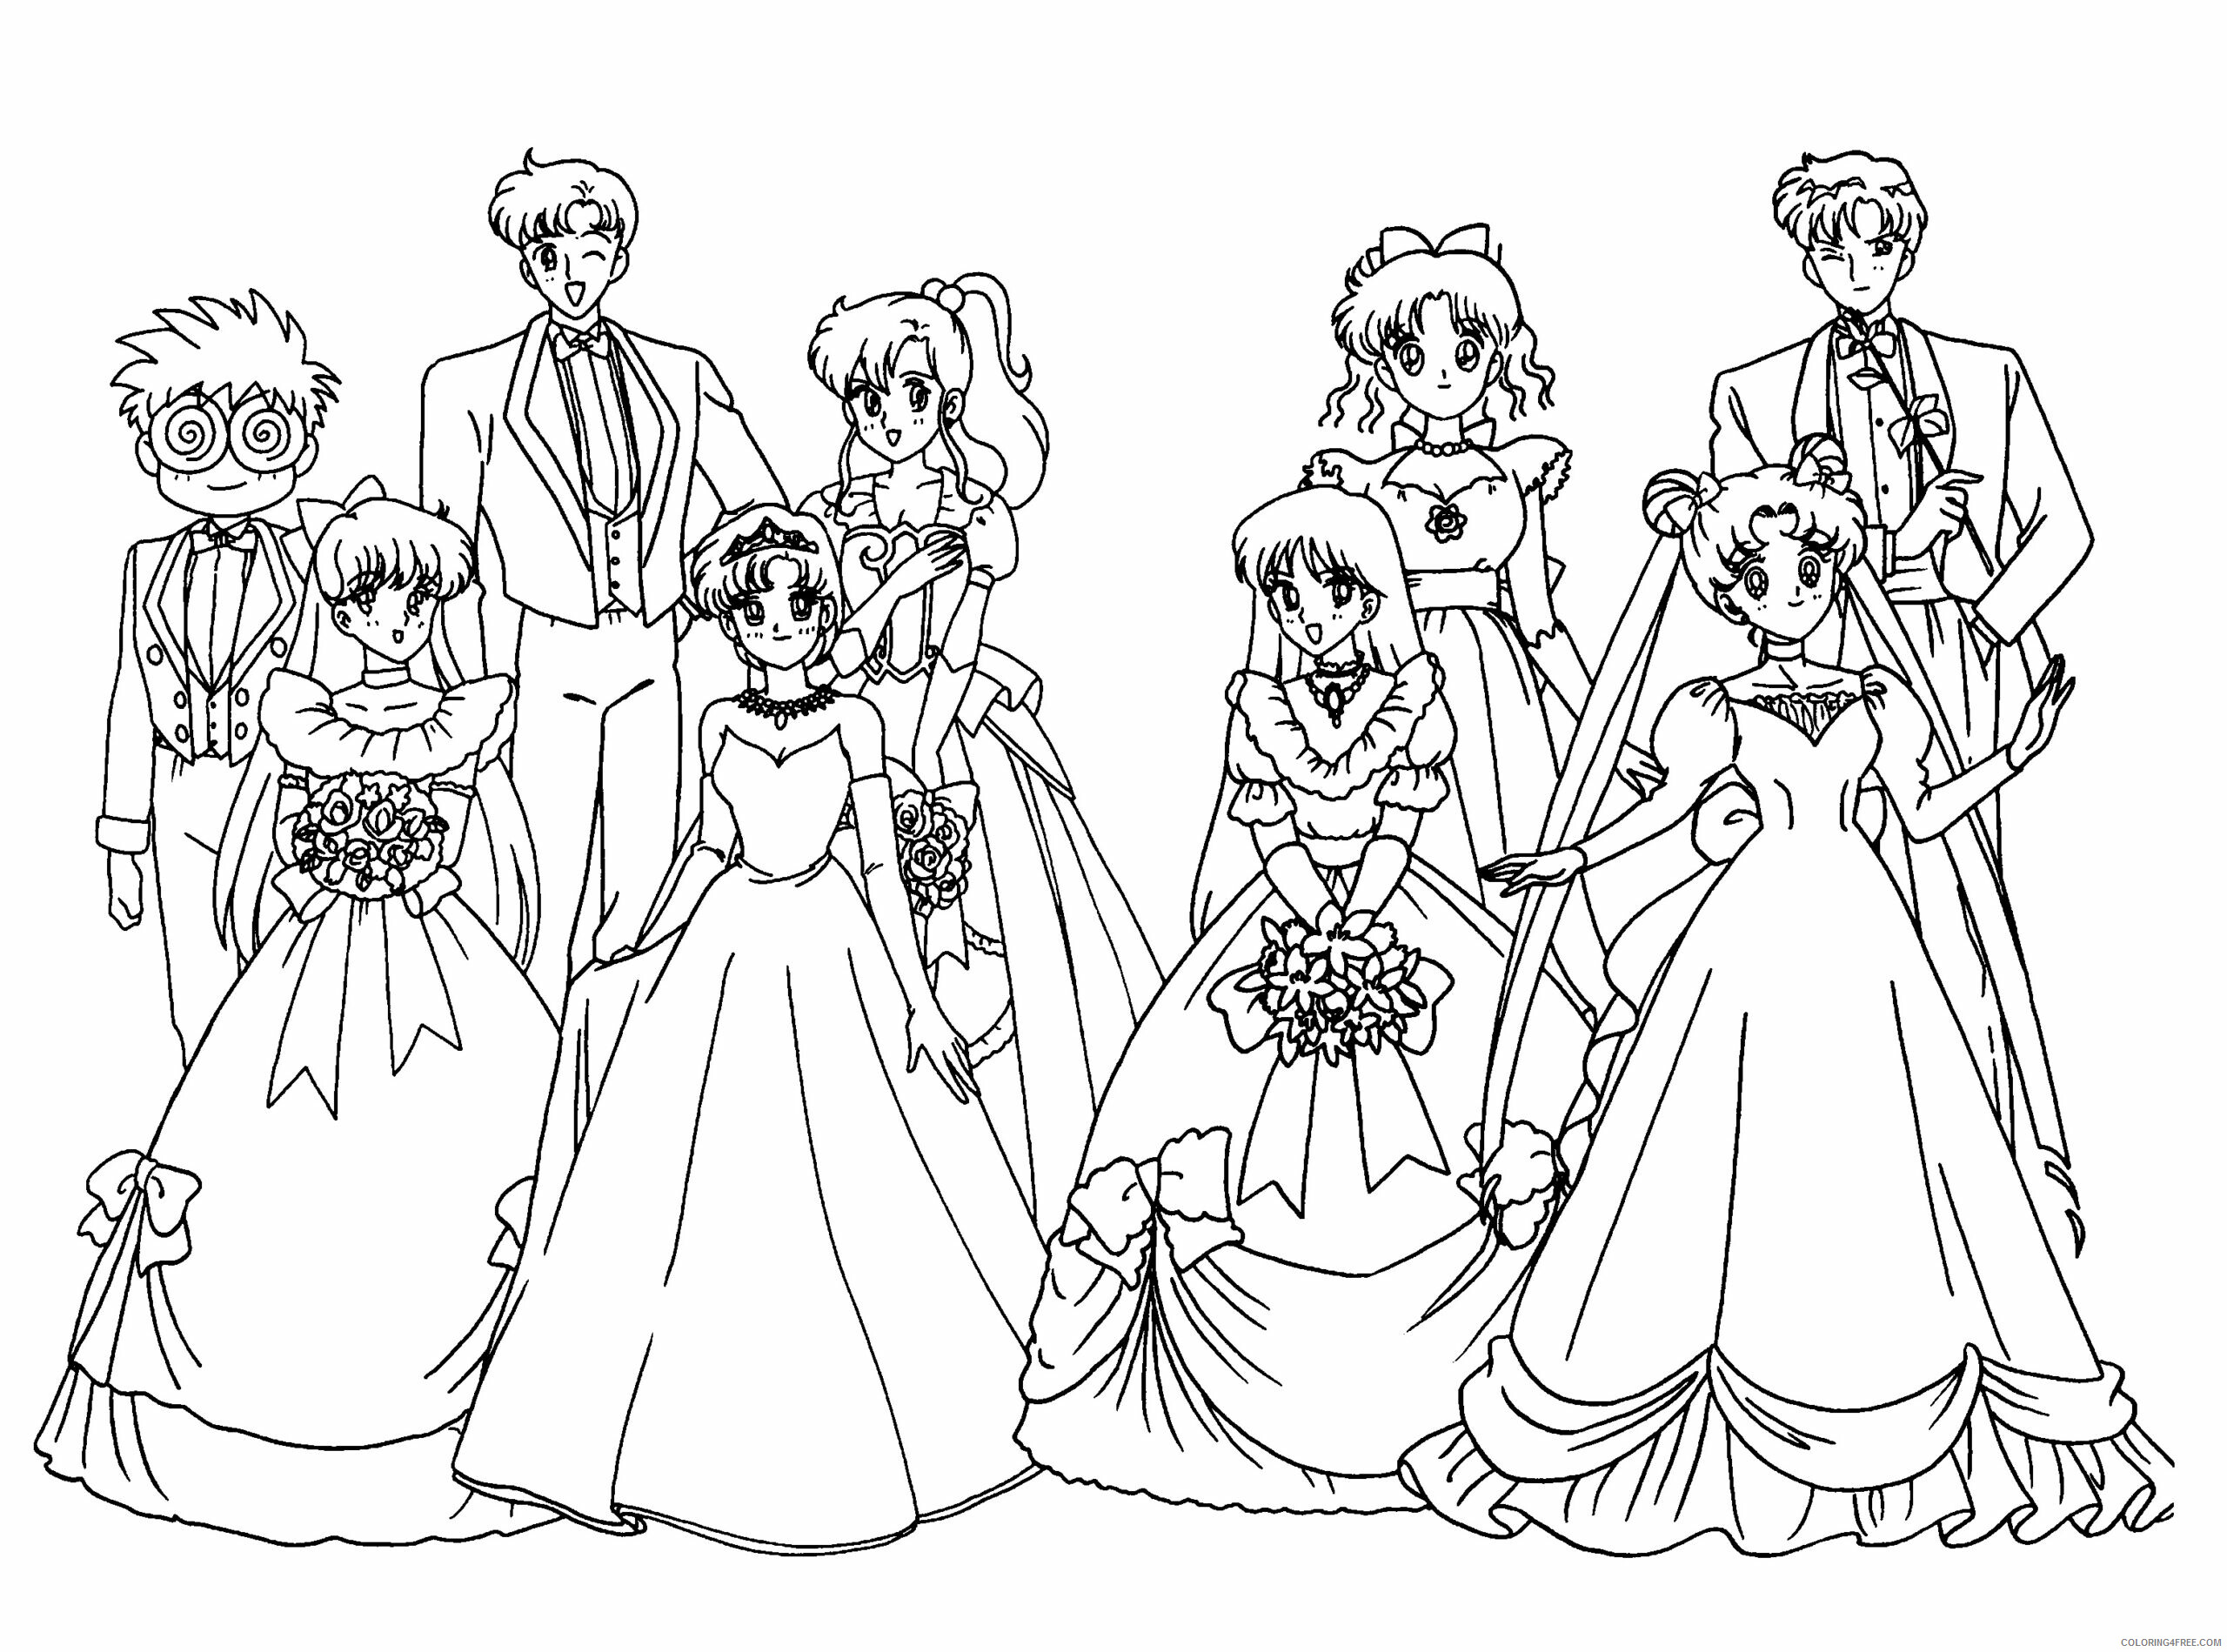 Sailor Moon Printable Coloring Pages Anime sailormoon 68 2021 1118 Coloring4free